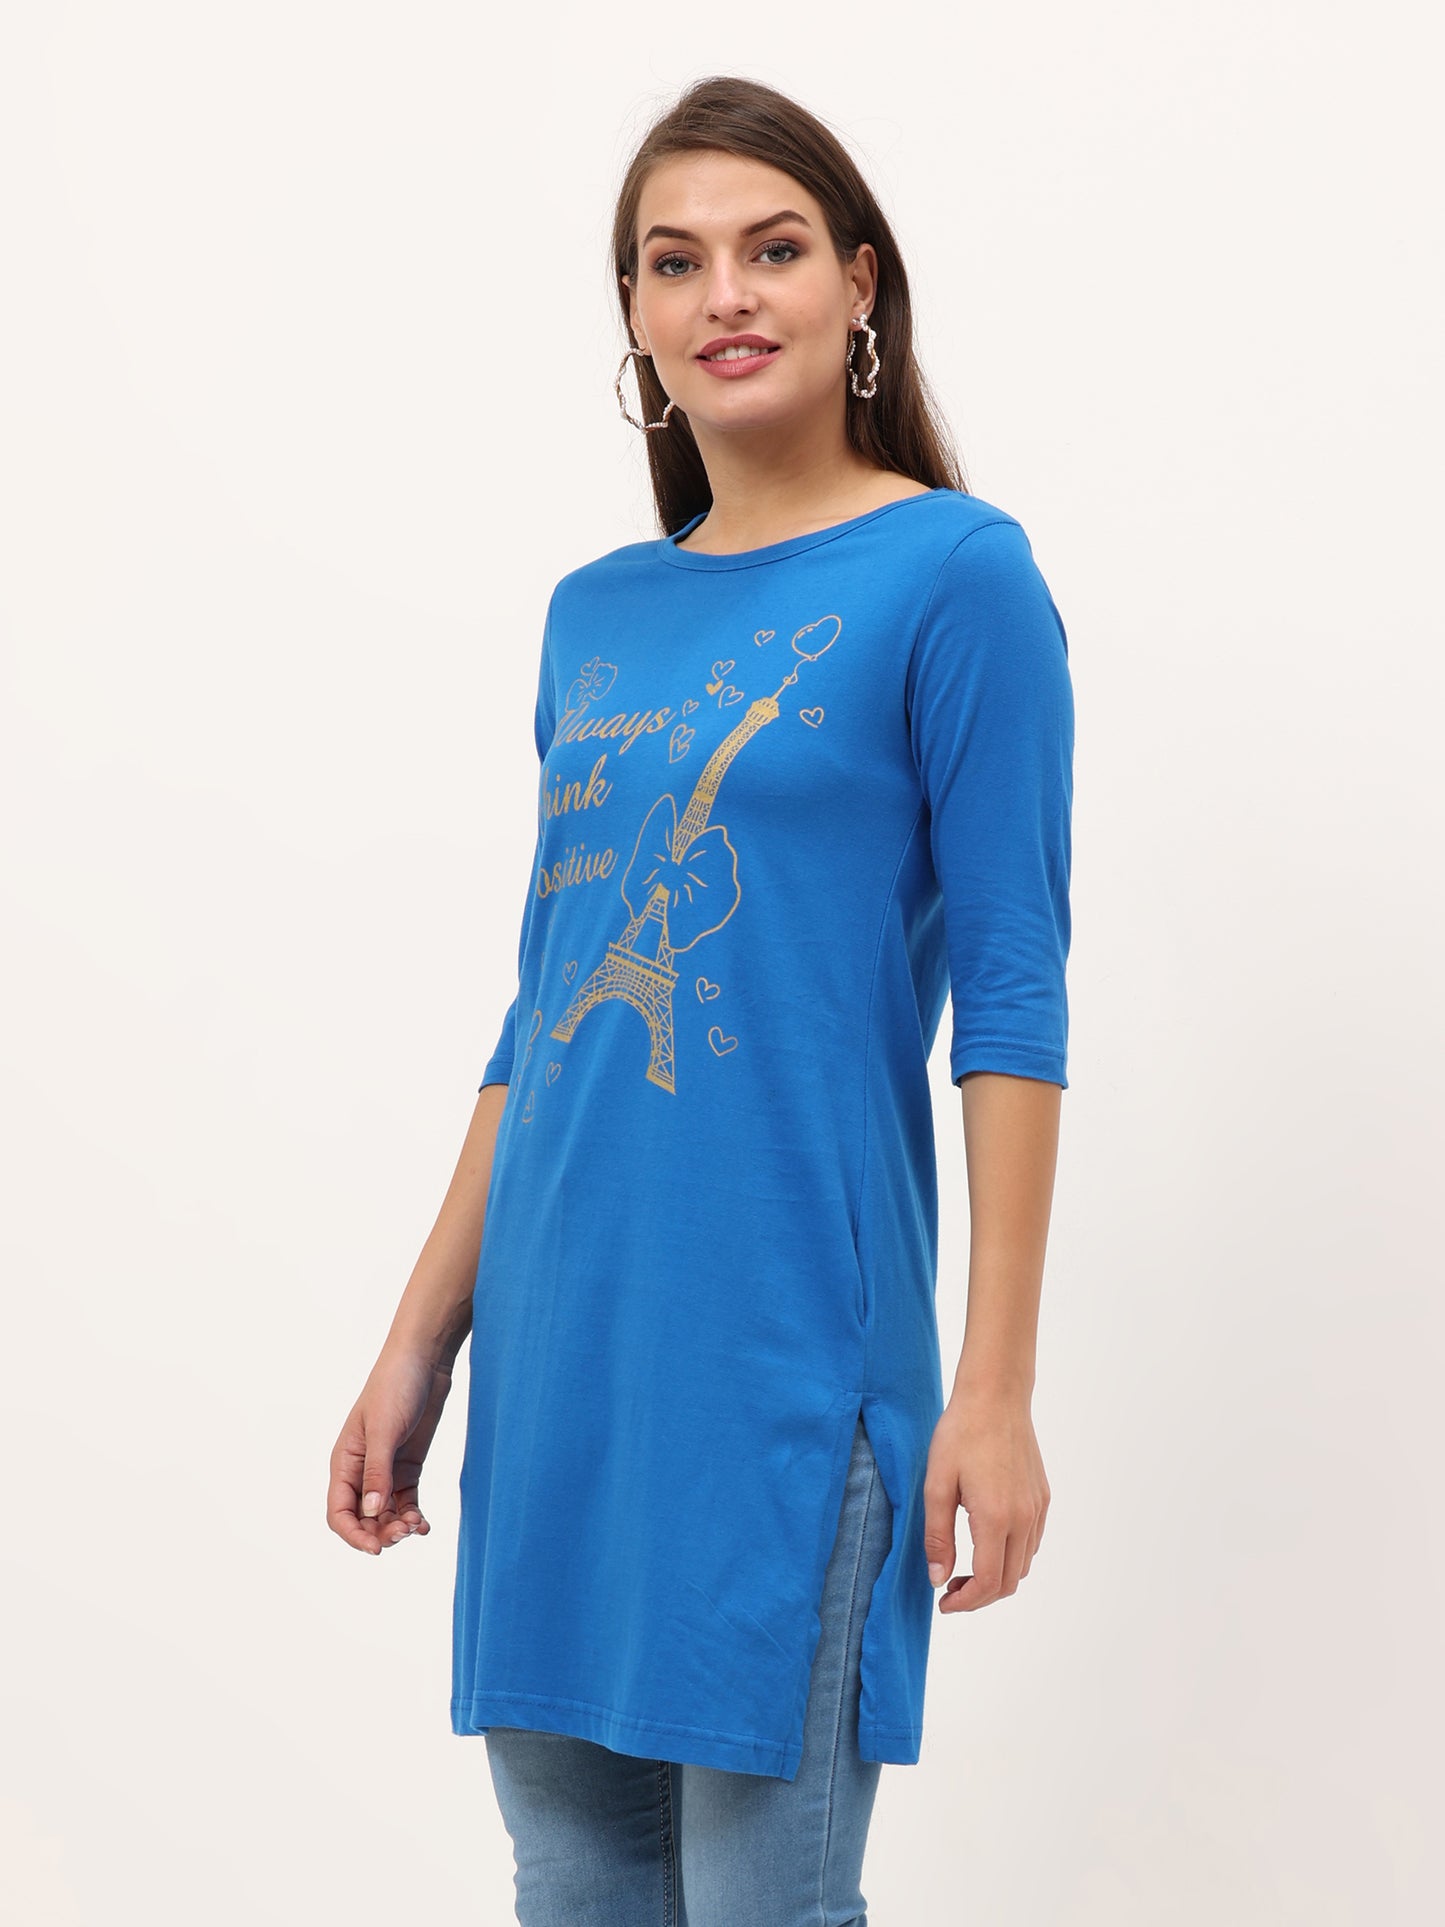 Women's Cotton Printed 3/4 Sleeve Royal Blue Color Long Top